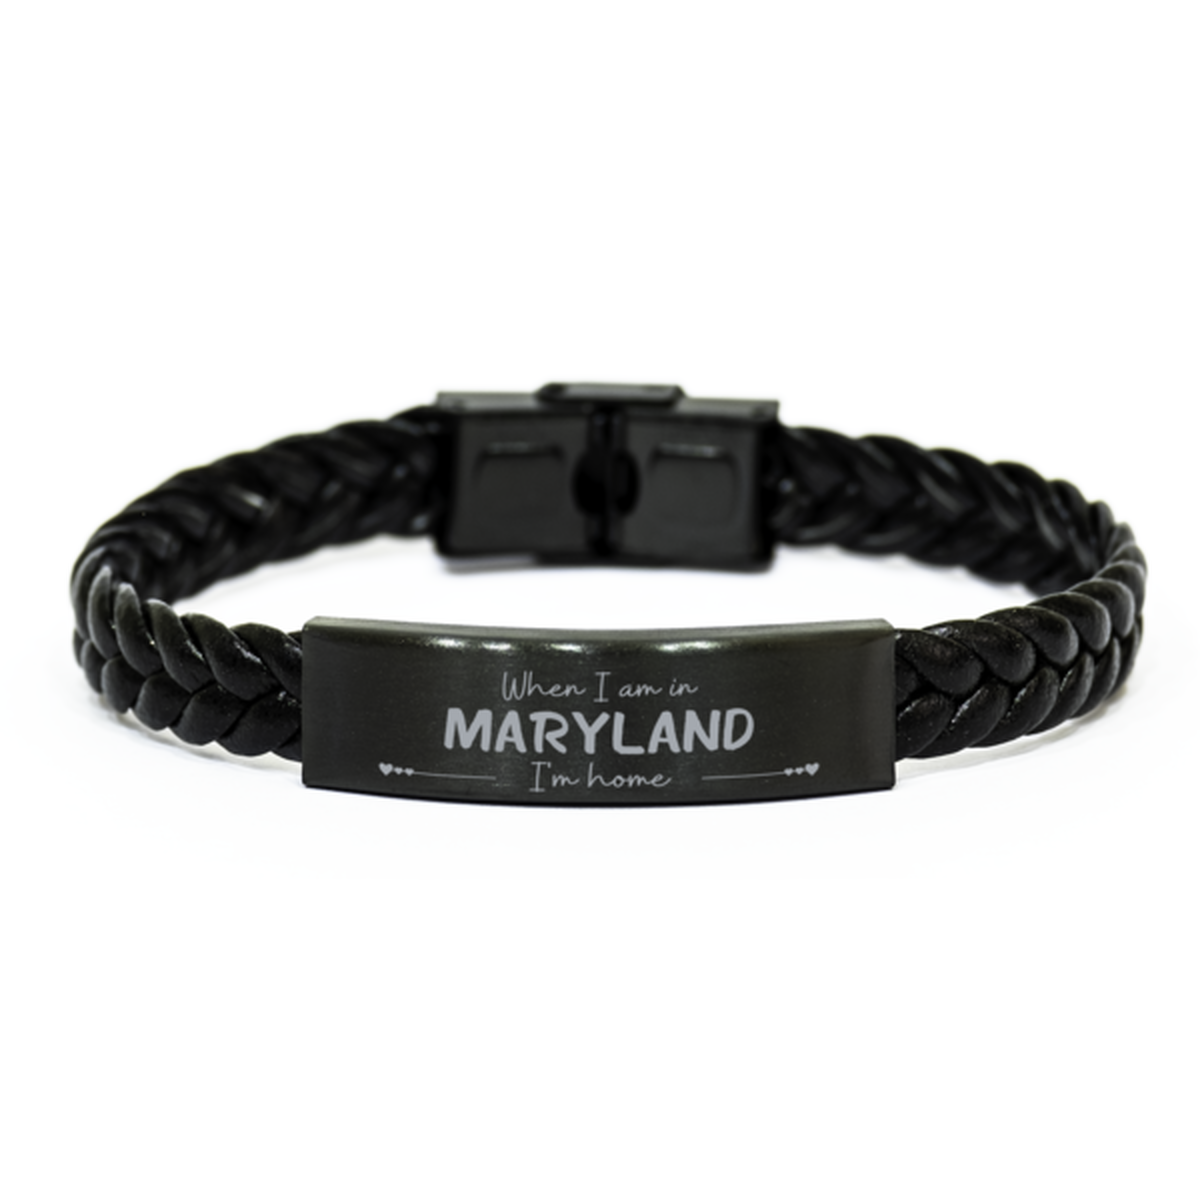 When I am in Maryland I'm home Braided Leather Bracelet, Cheap Gifts For Maryland, State Maryland Birthday Gifts for Friends Coworker